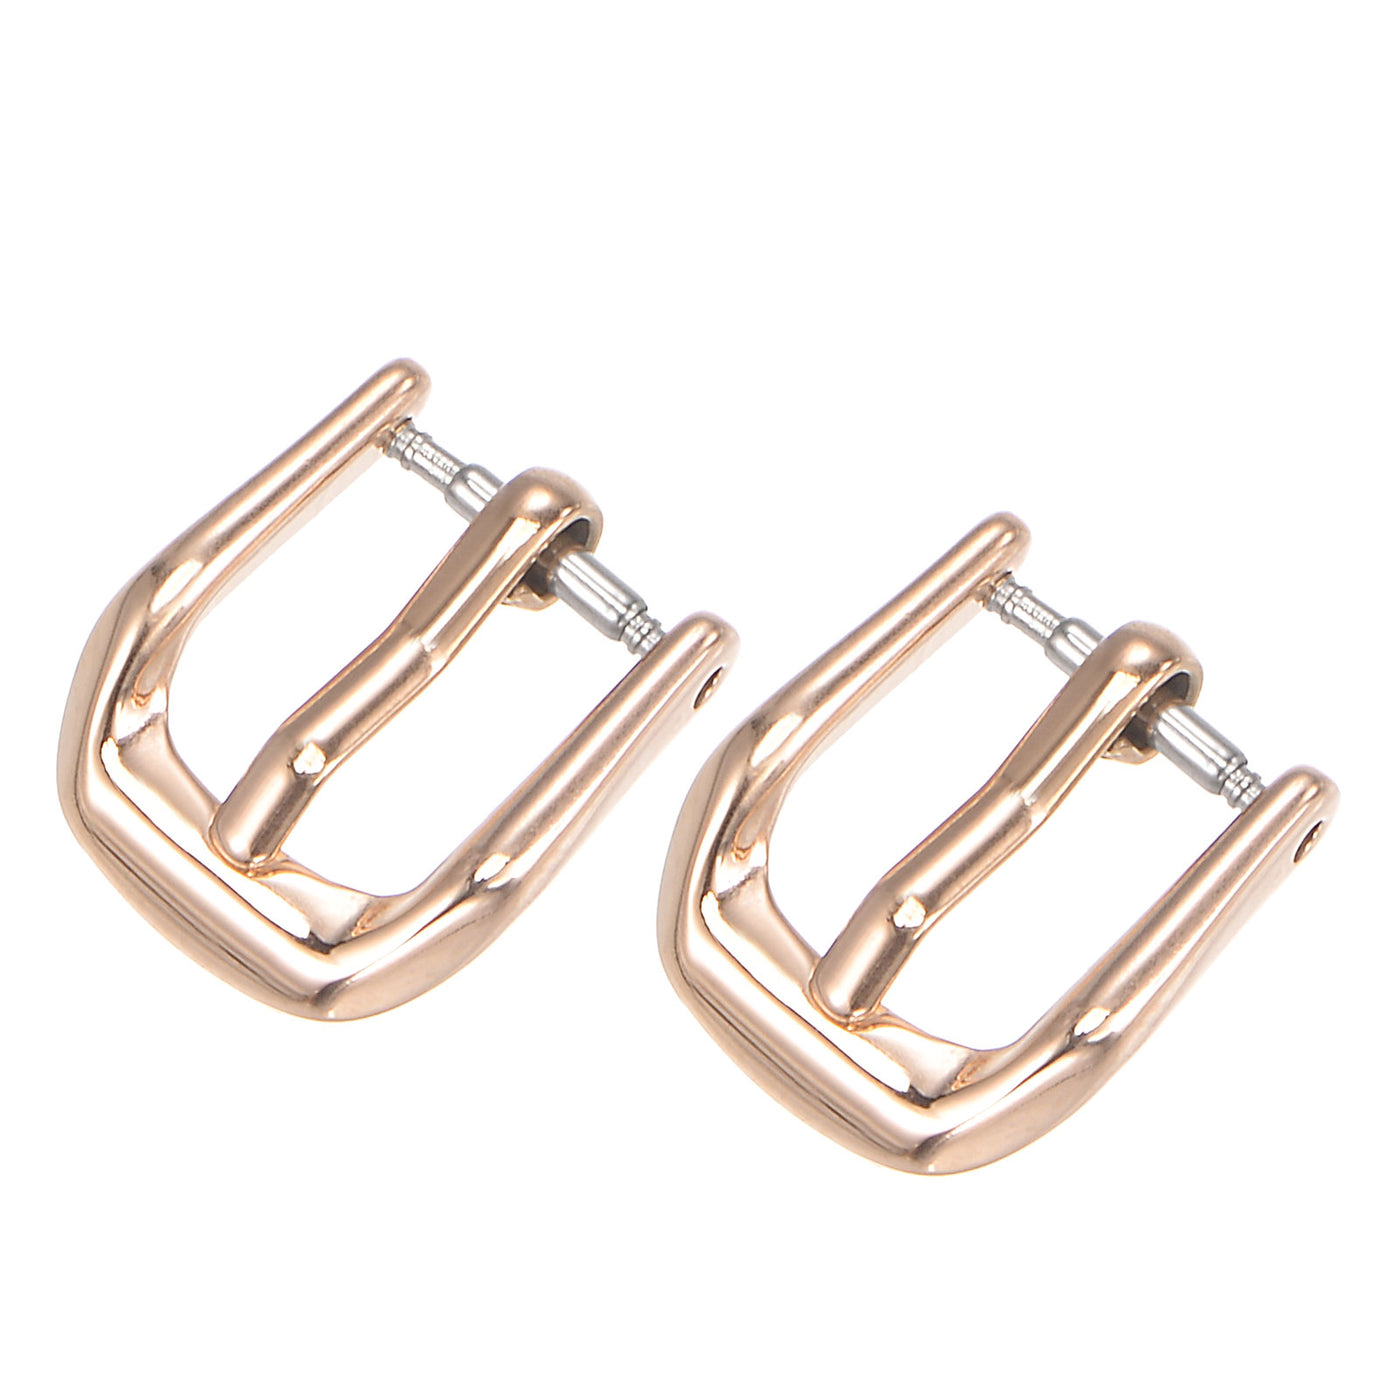 Uxcell Uxcell Watch SUS316 Polished PVD Buckle, Rose Gold Tone for 16mm Width Watch Bands 2Pcs